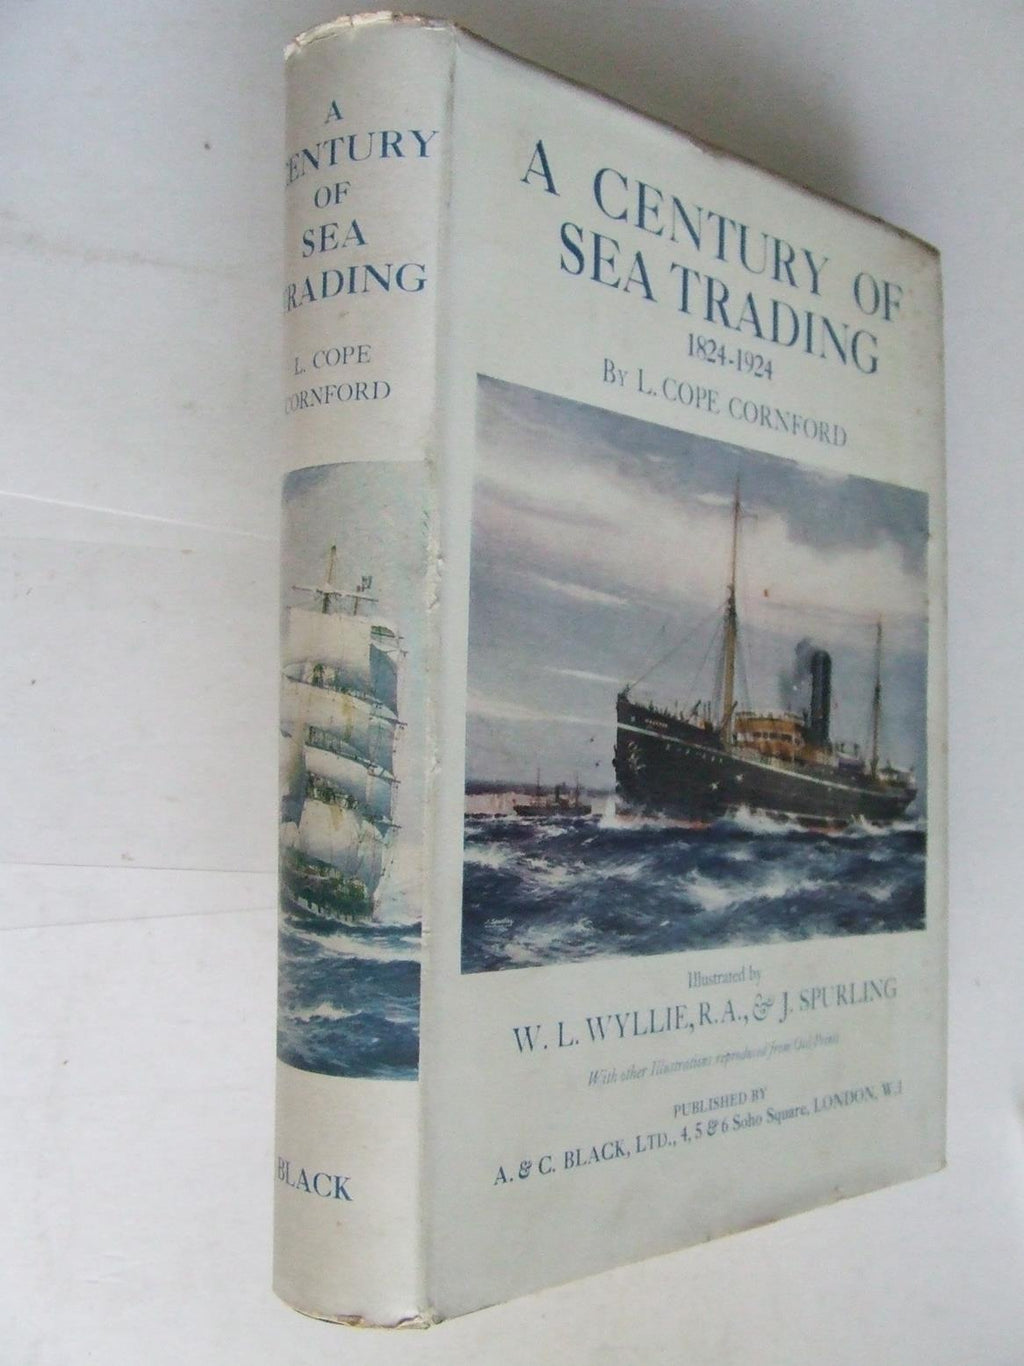 A Century of Sea Trading 1824-1924, the General Steam Navigation Co.Ltd.